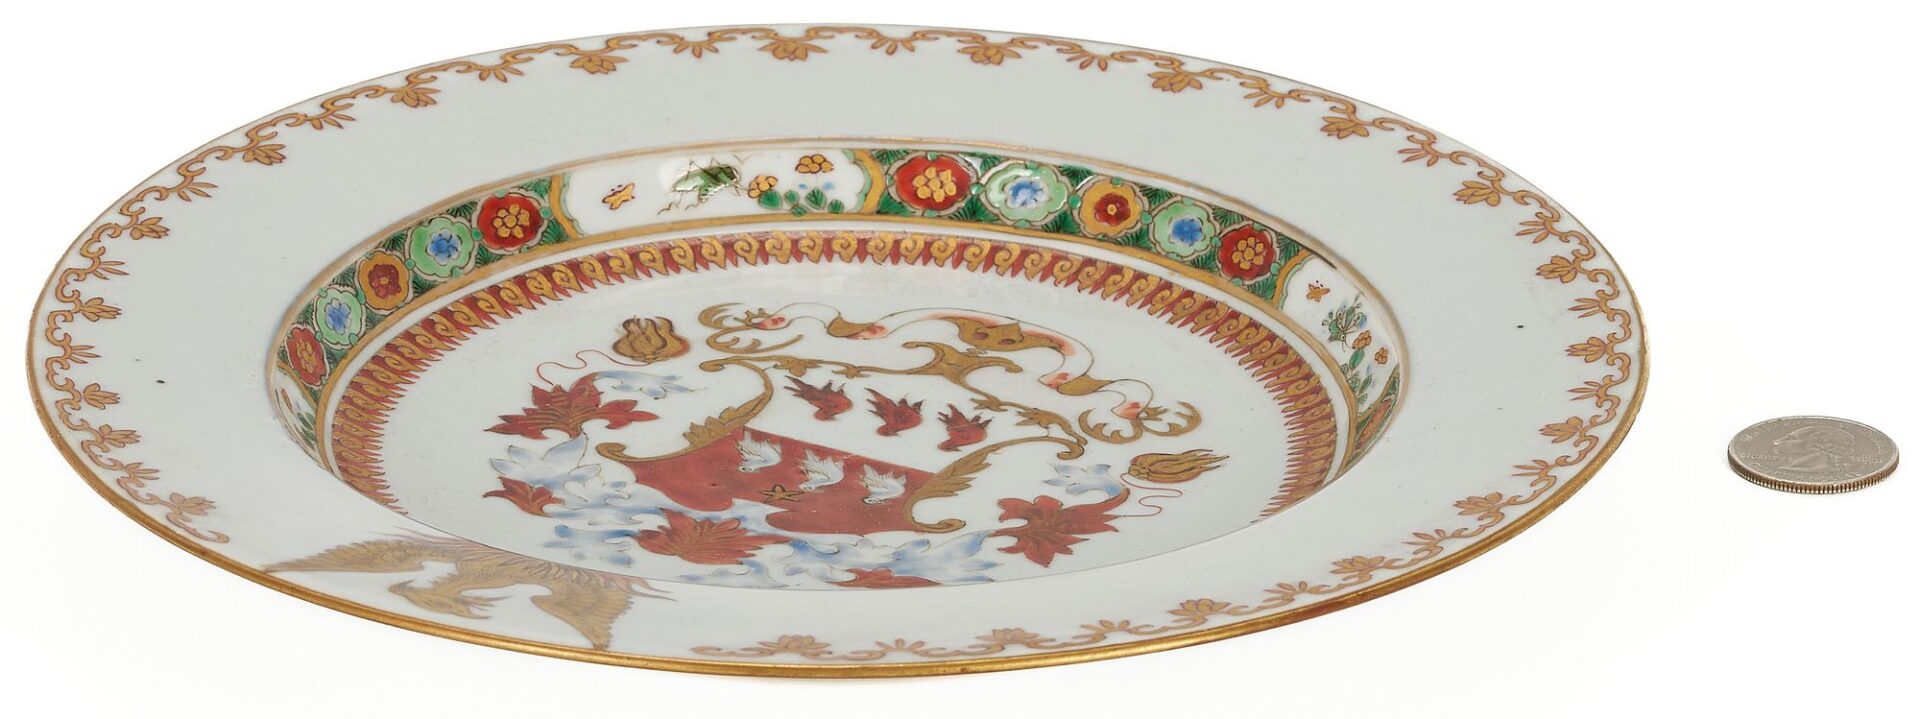 Lot 5: Chinese Export Porcelain Plate, Arms of Fenwick